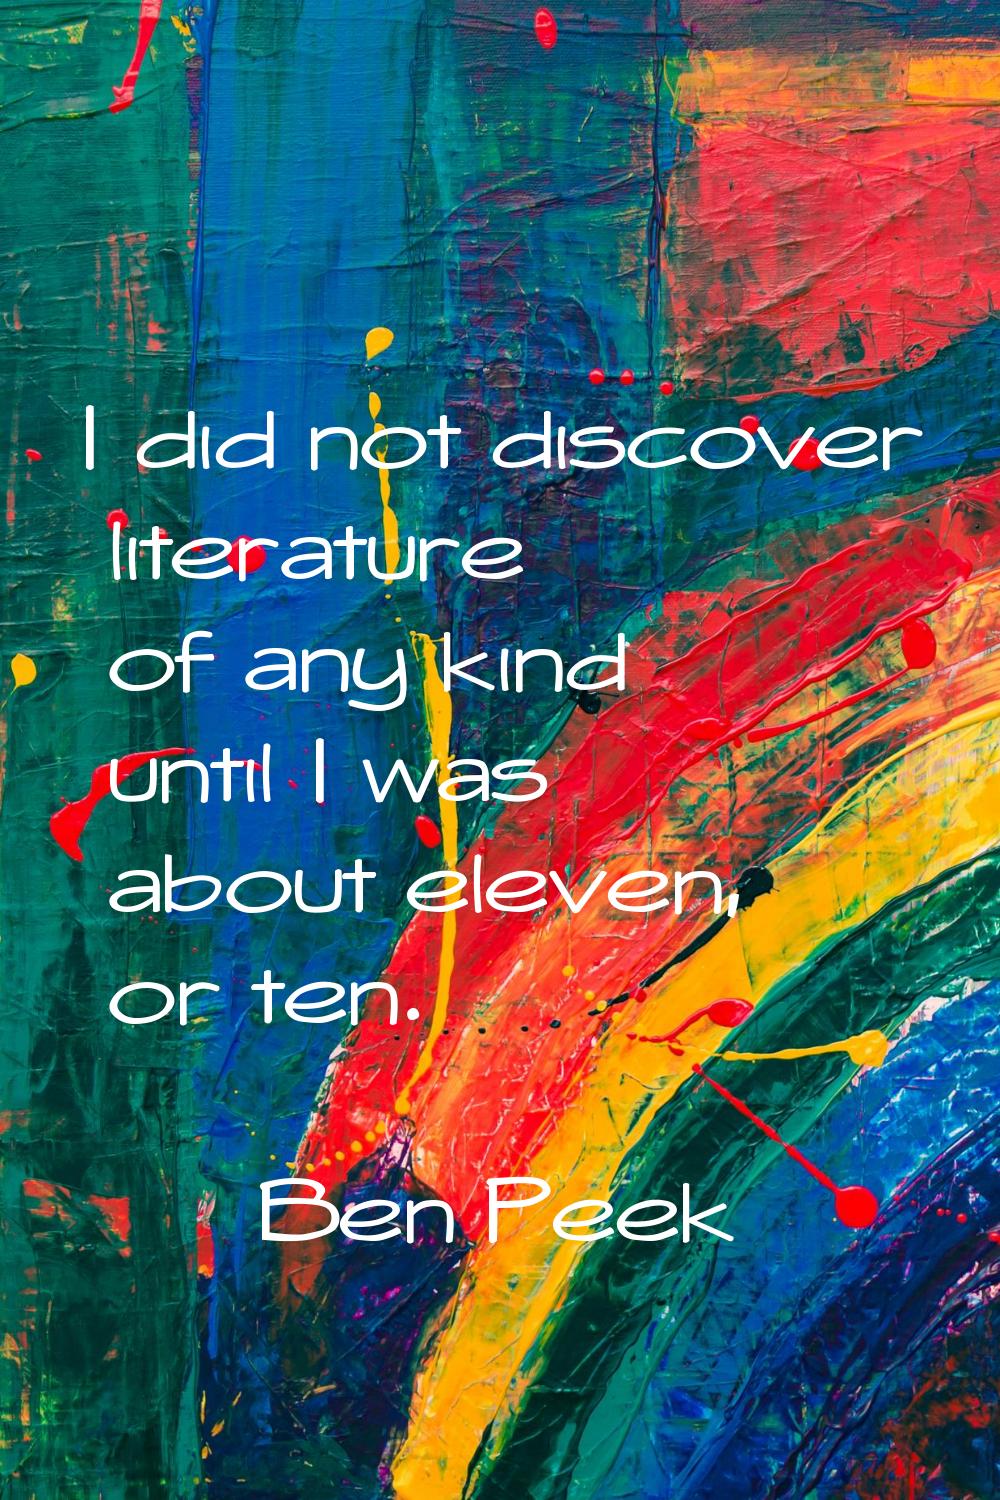 I did not discover literature of any kind until I was about eleven, or ten.